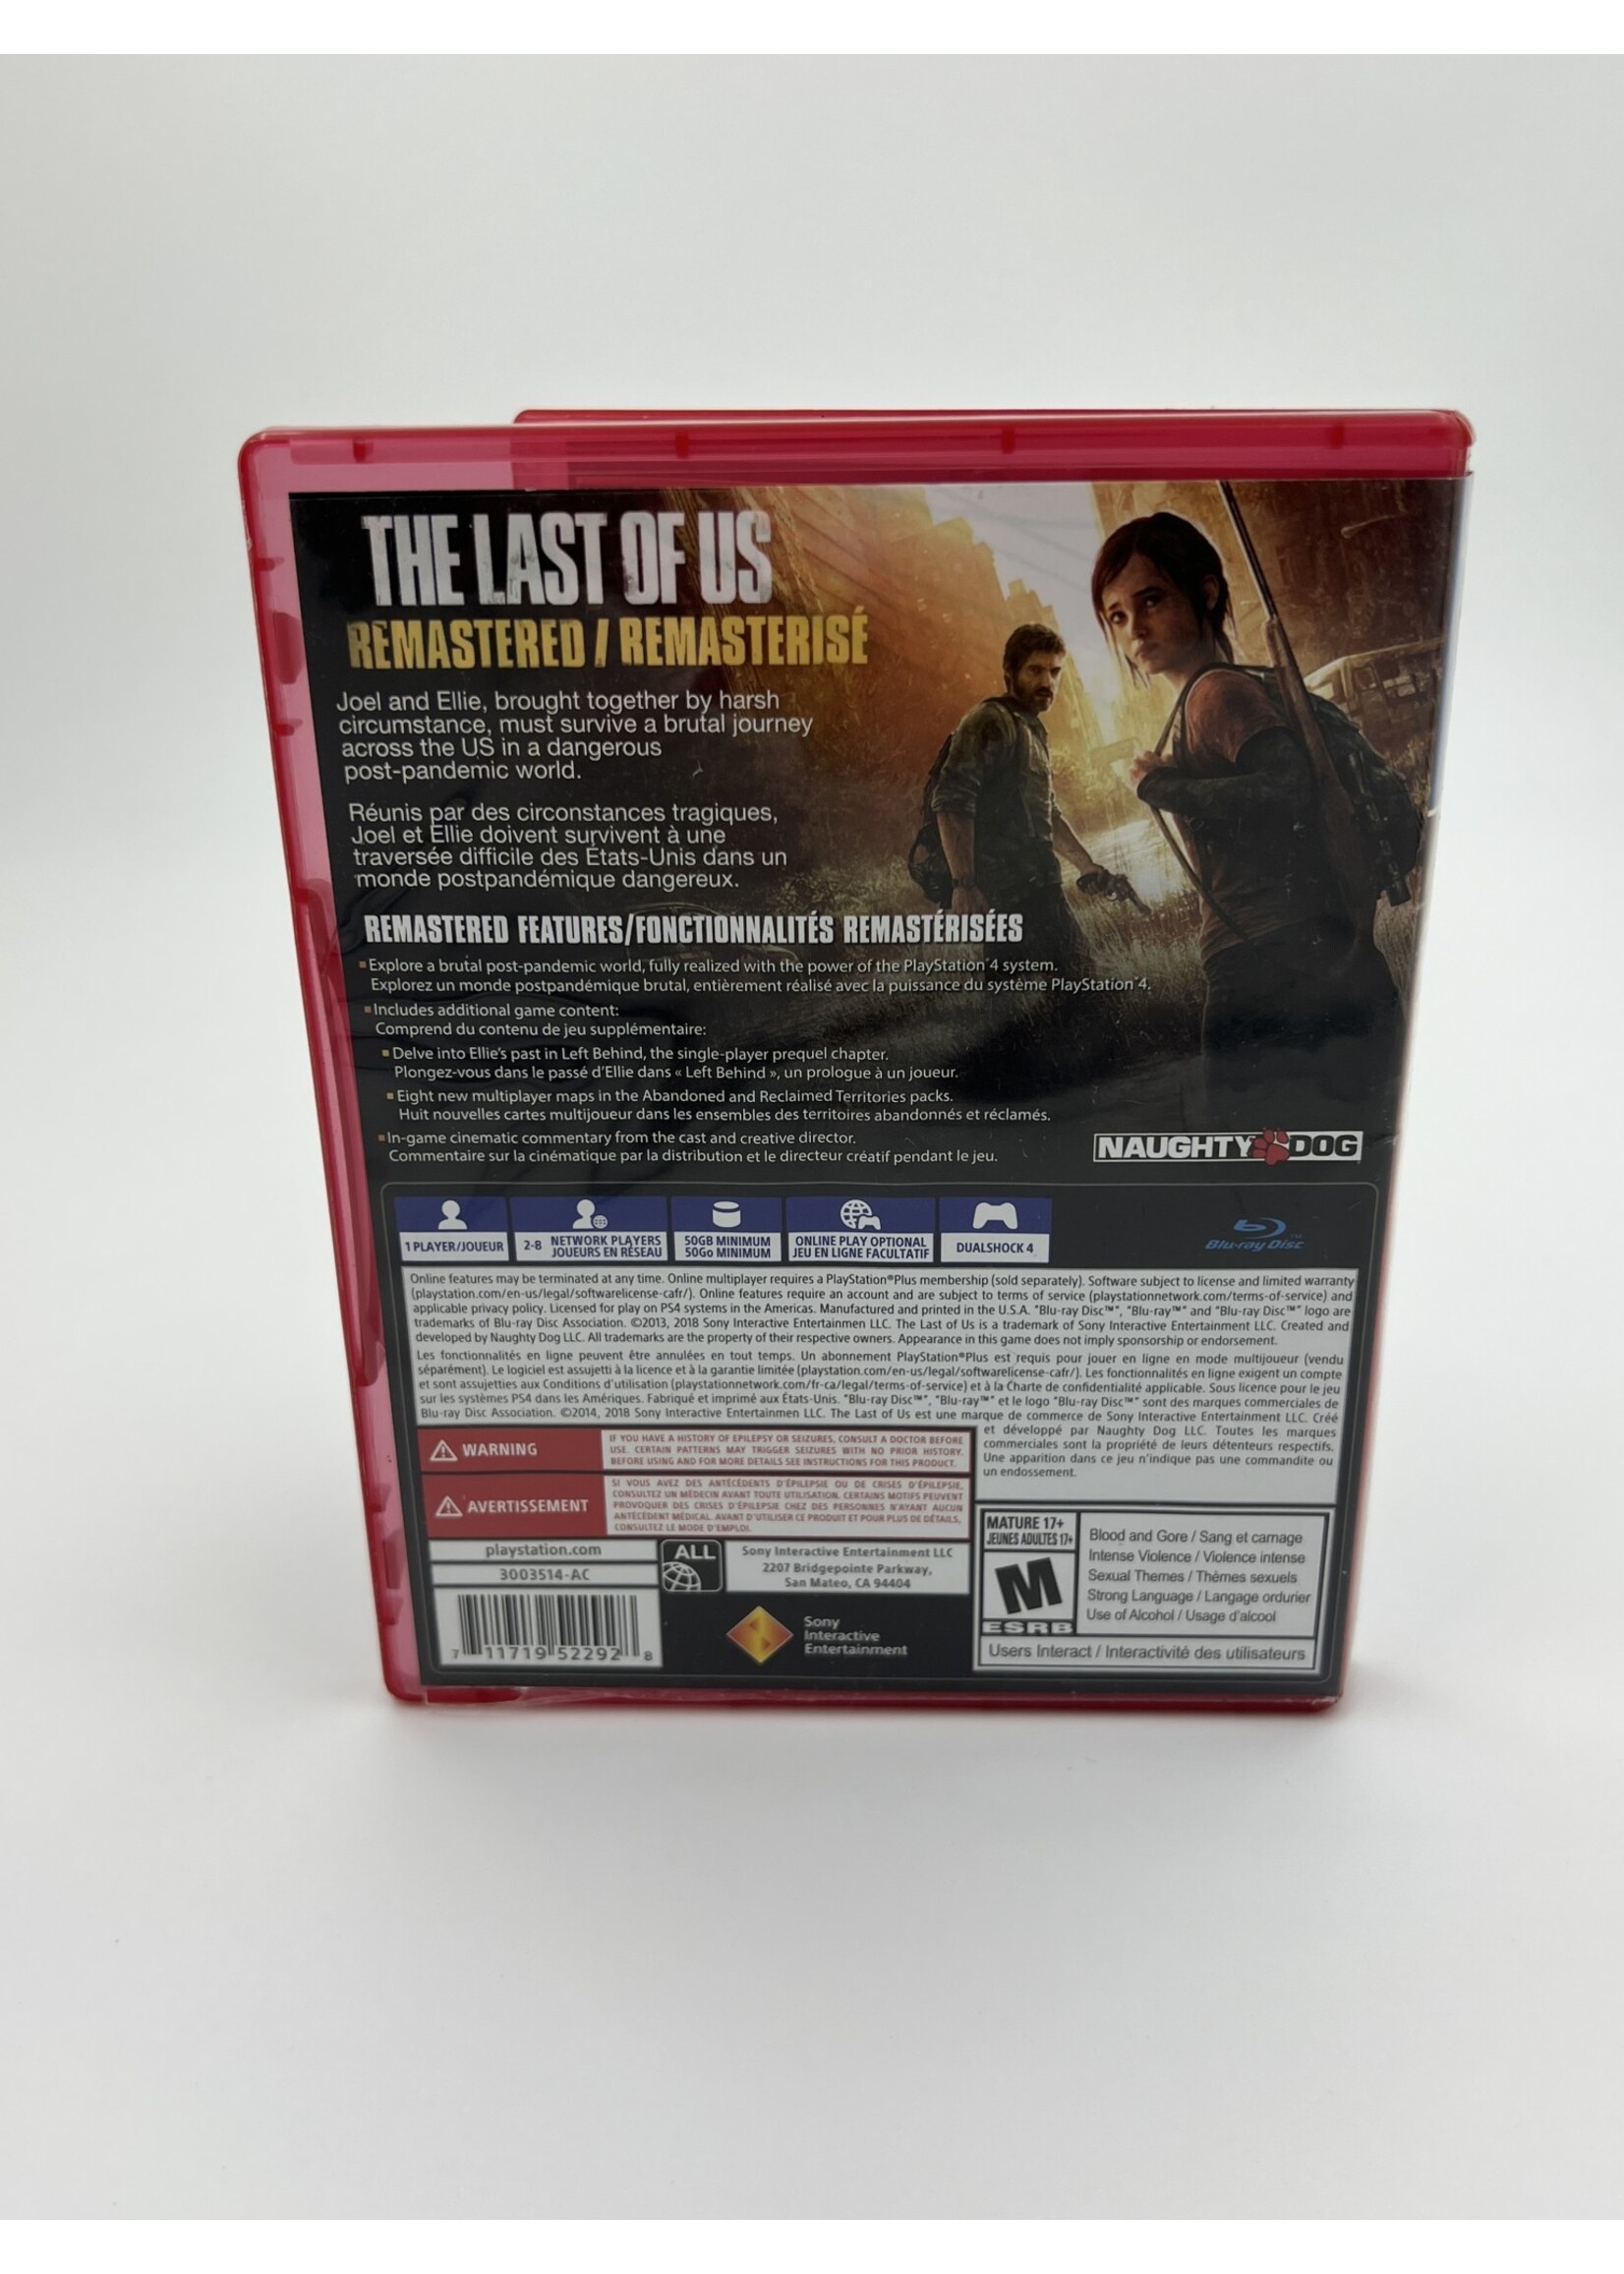 Sony   The Last of Us Remastered PS4